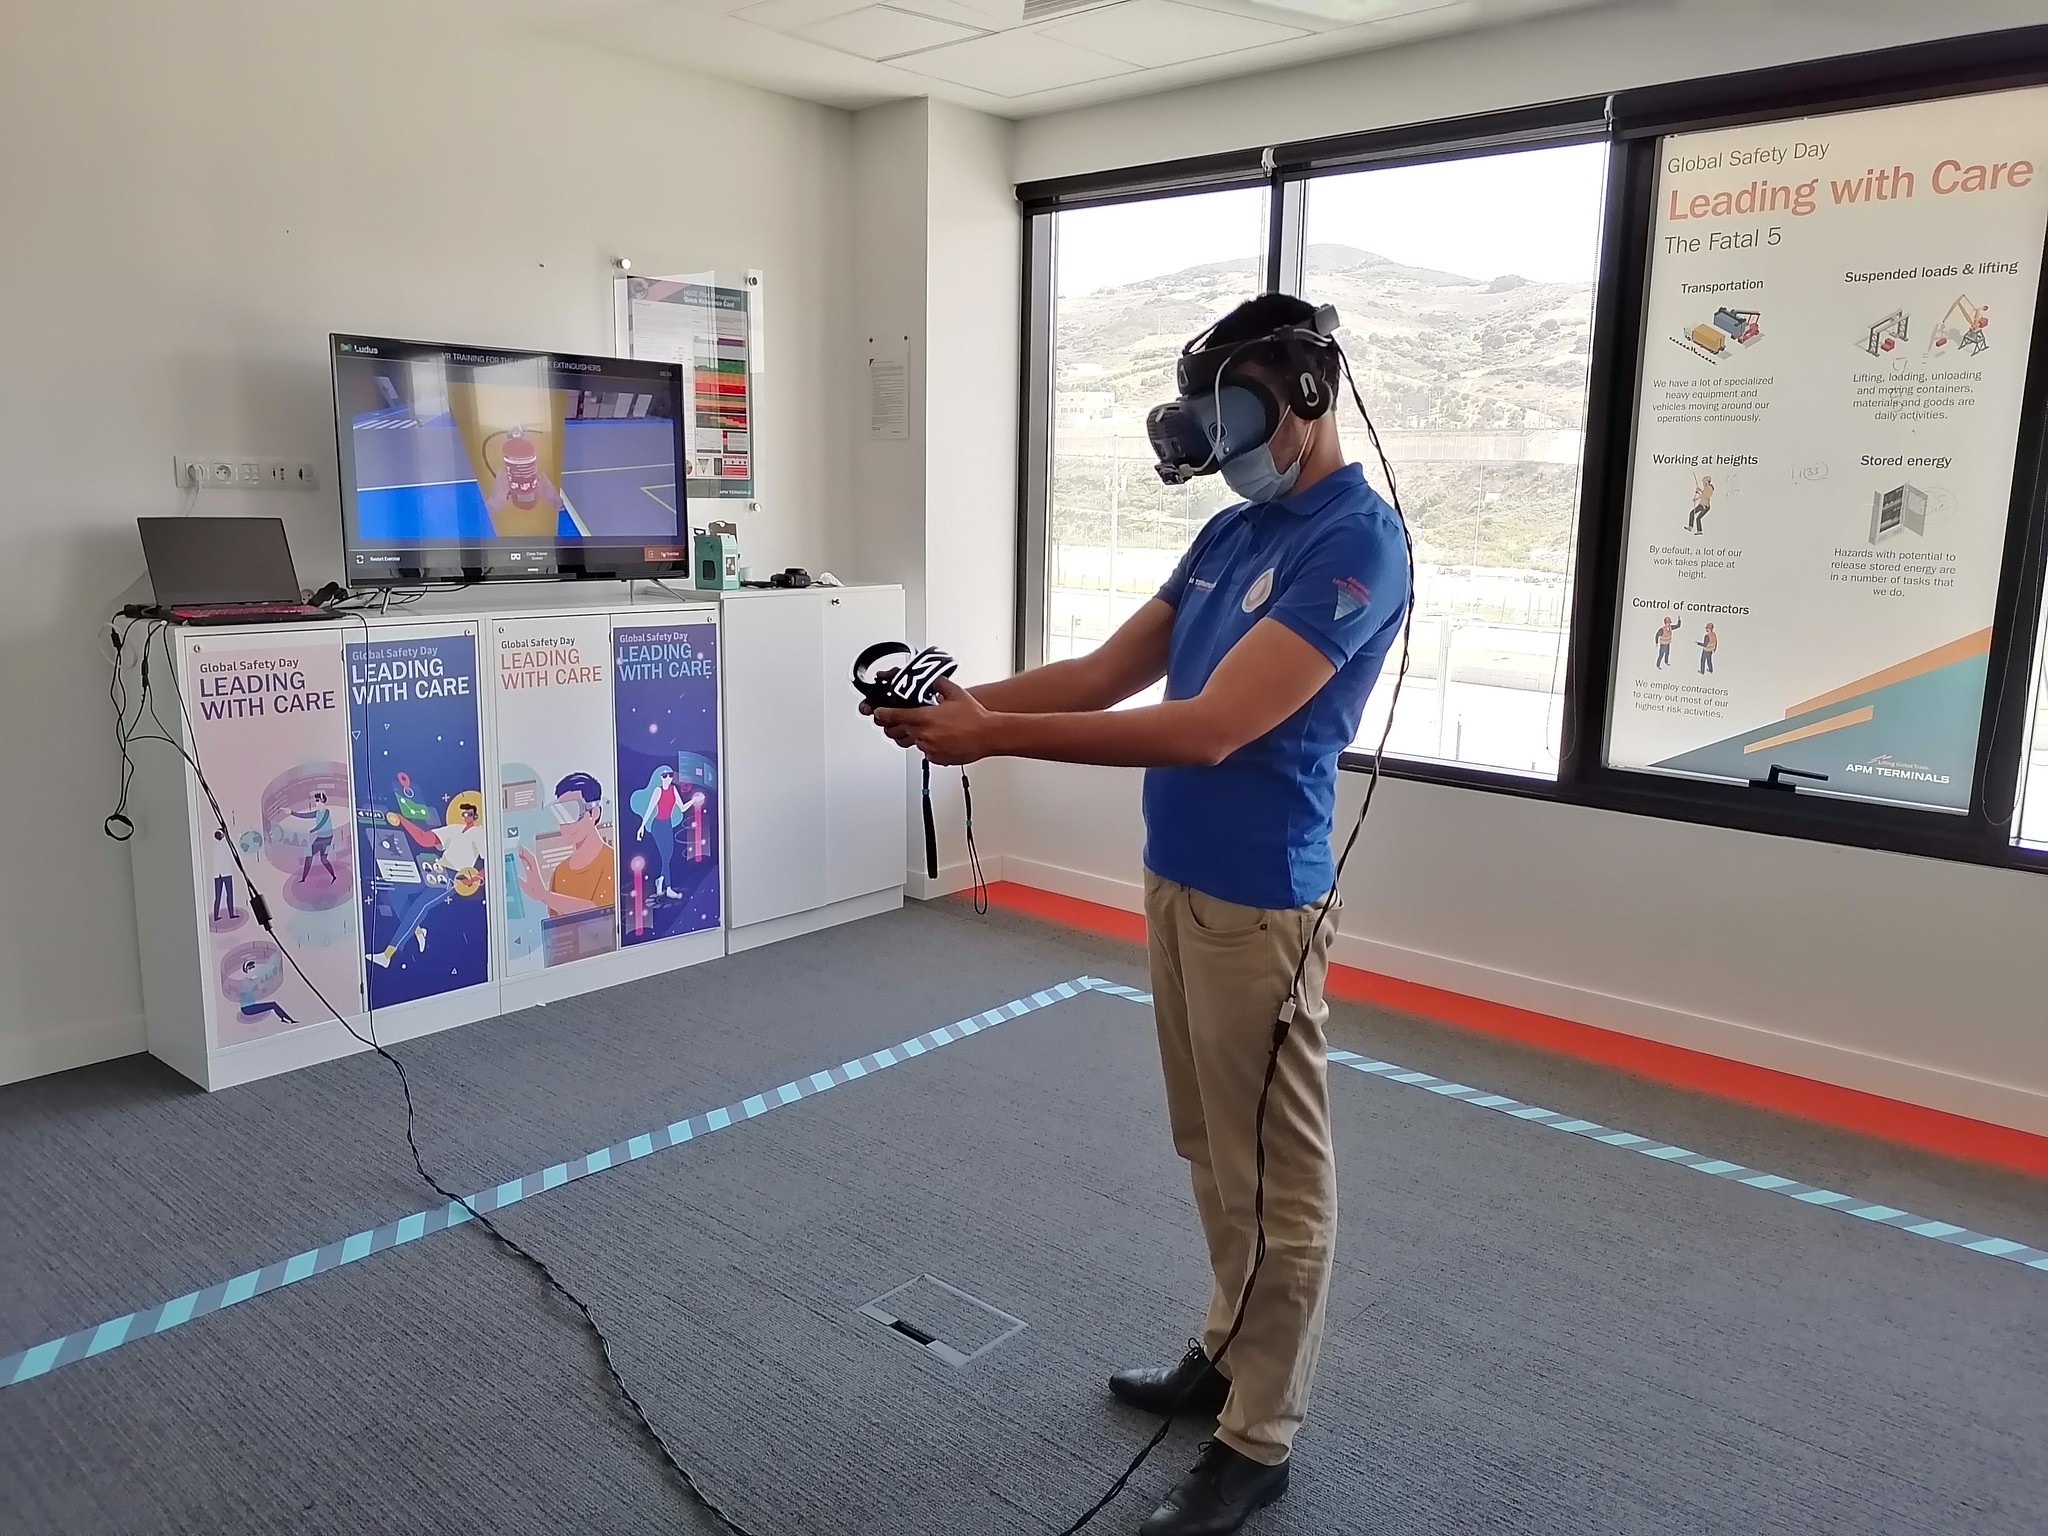 Morocco : Virtual reality brings safety training to life at APM Terminals MedPort Tangier